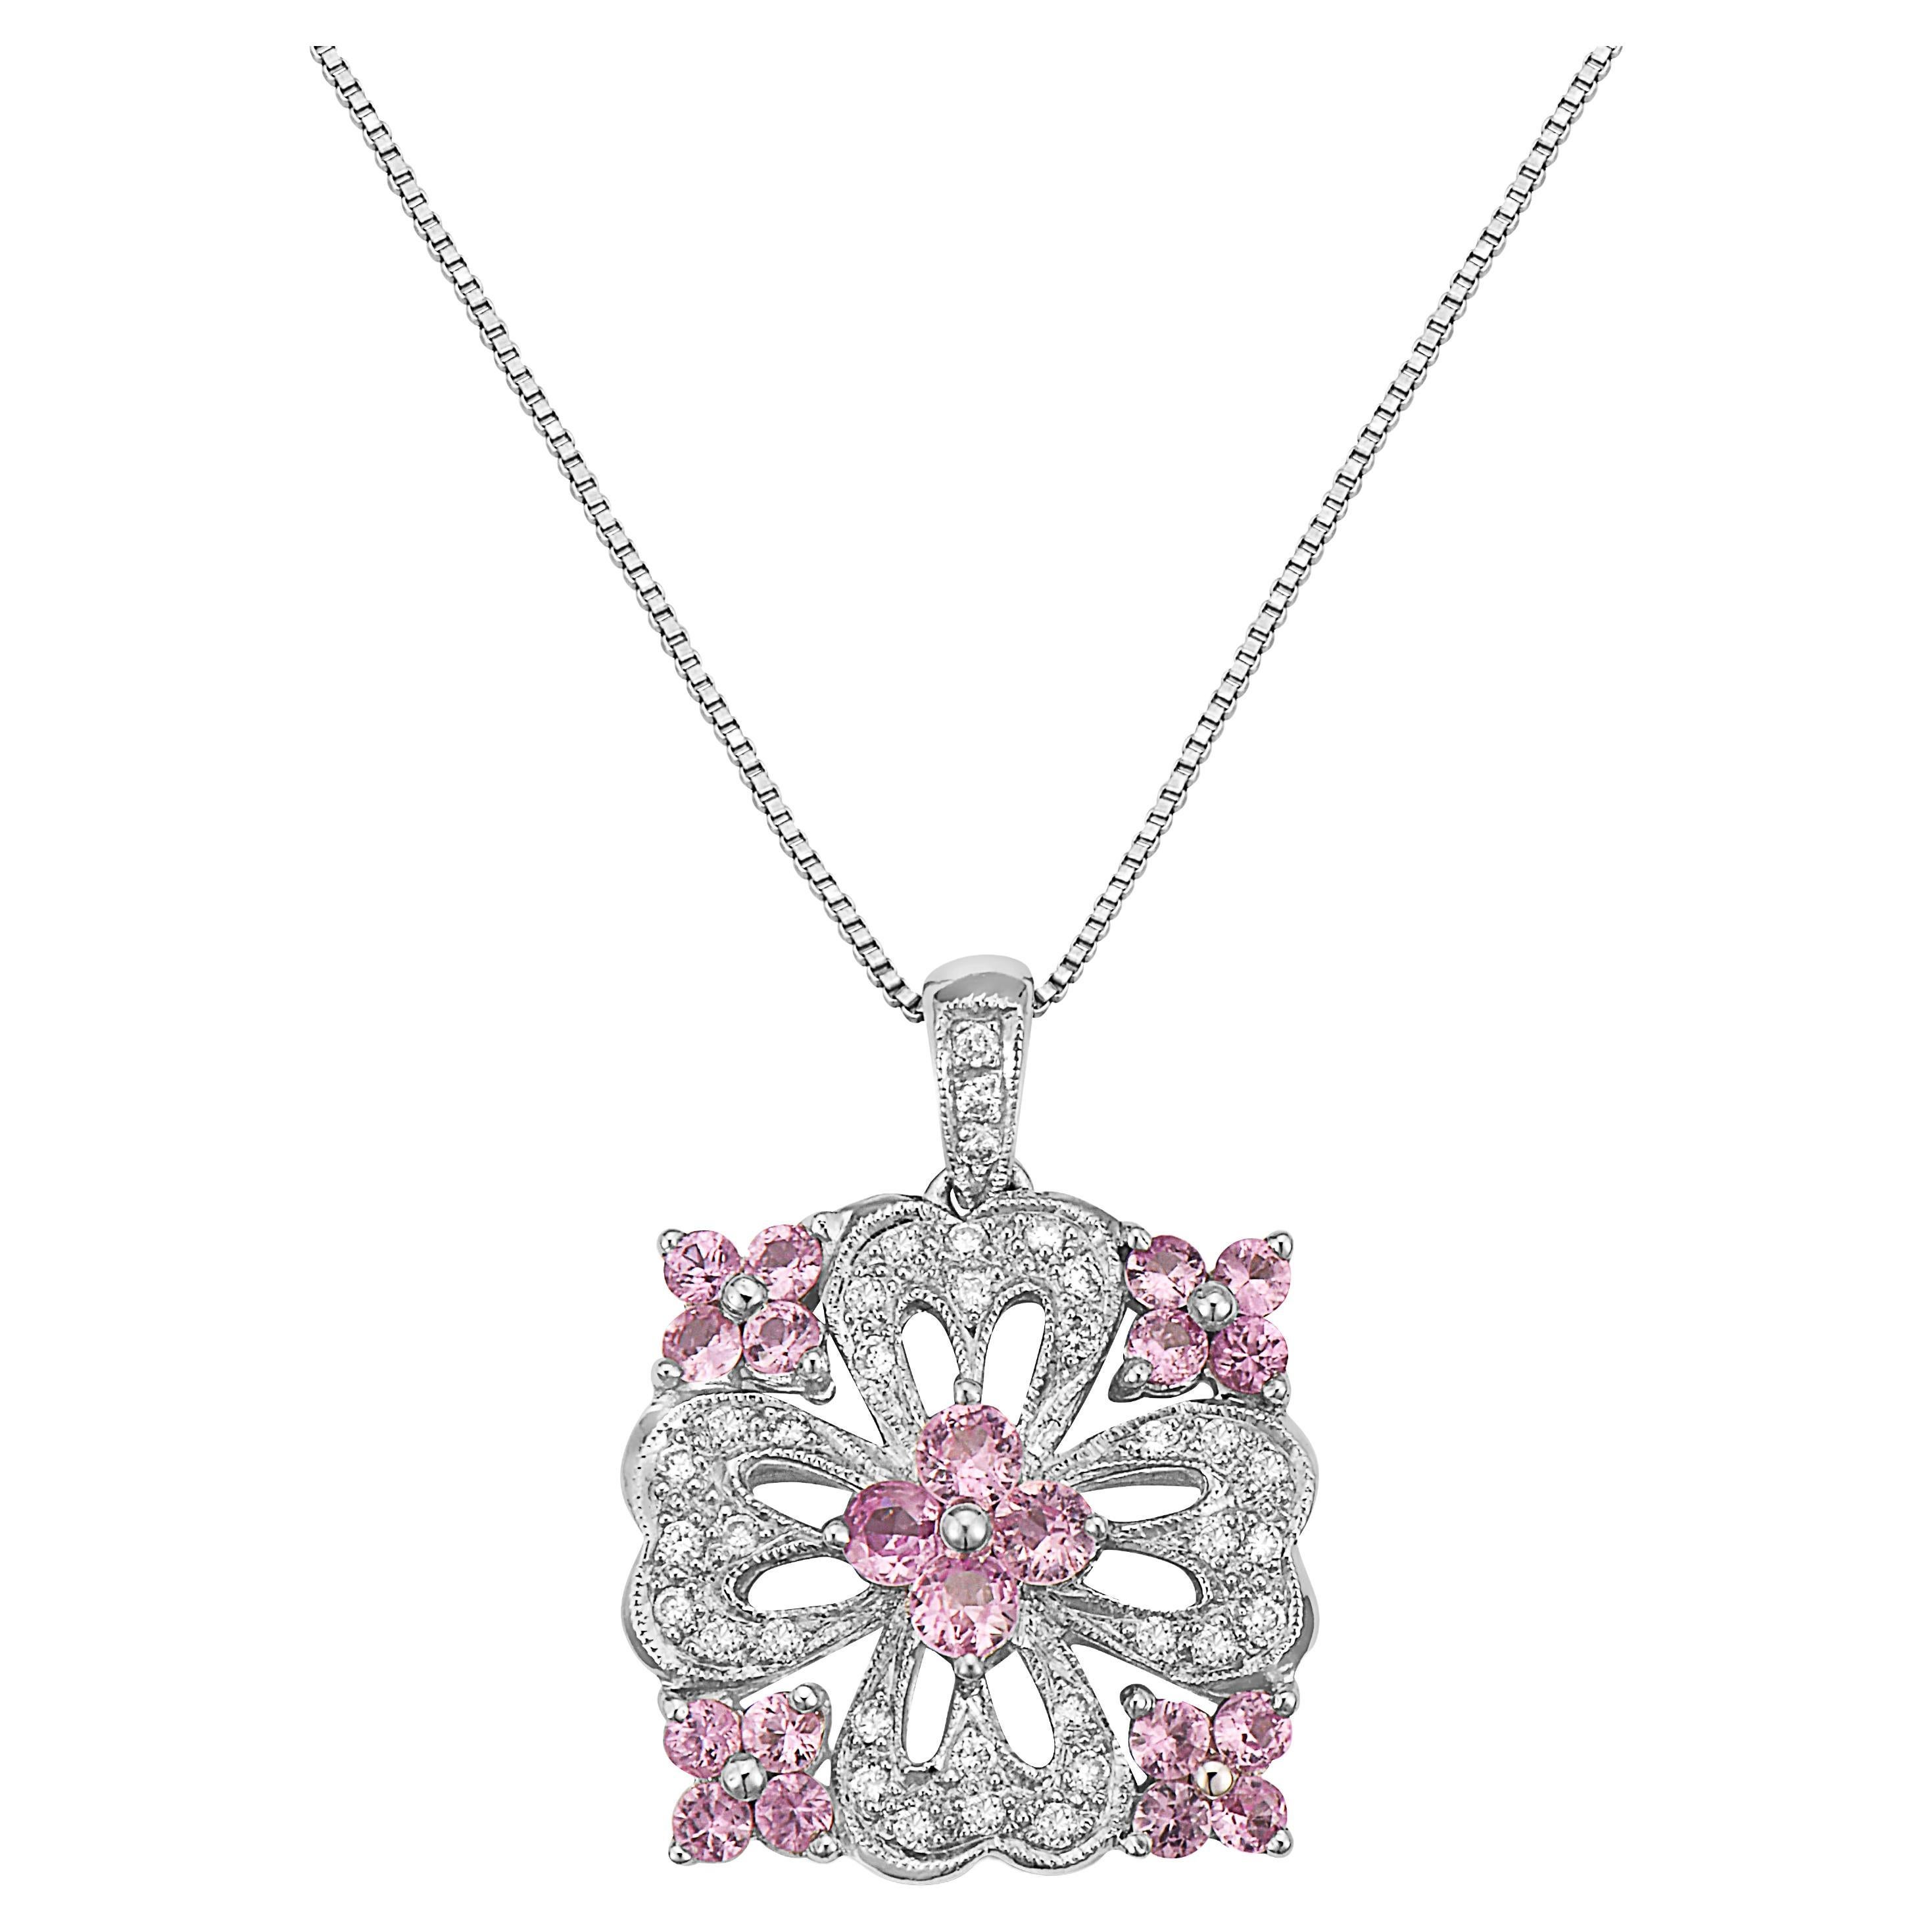 Levian Round Pink Sapphire White Diamond Pendant in 14K White Gold 1 3 8 Cts